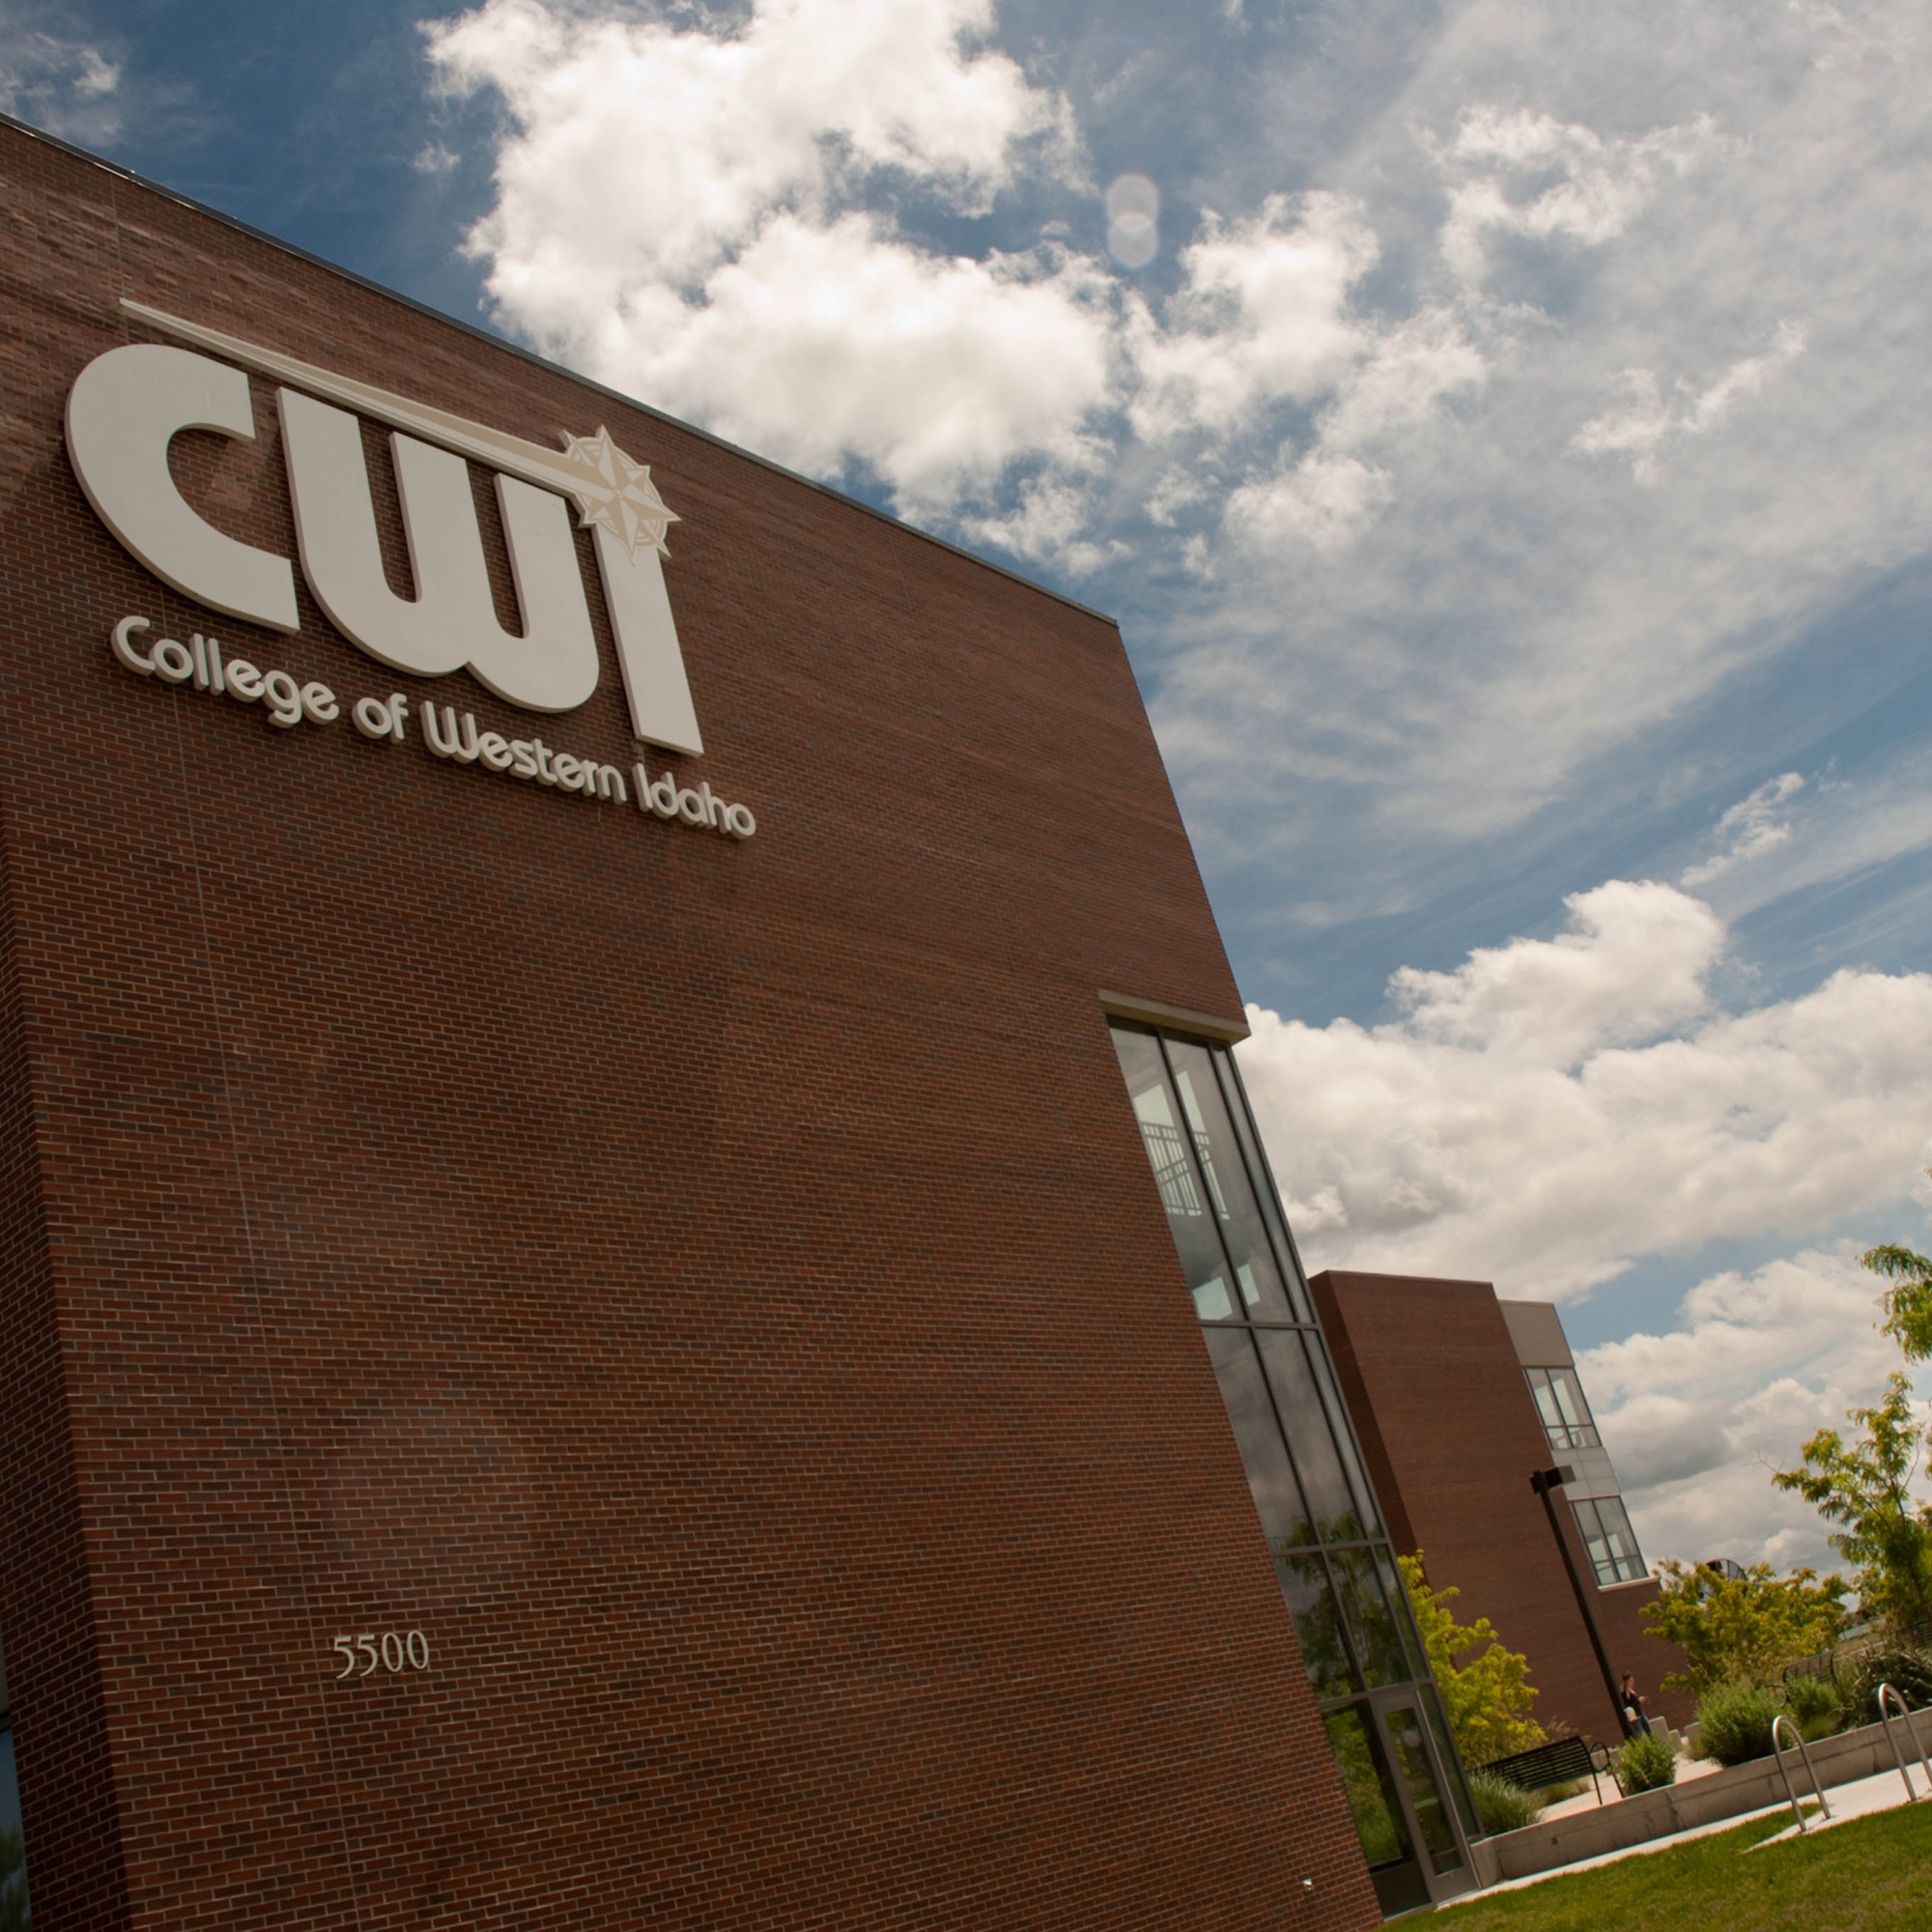 CWI logo on building